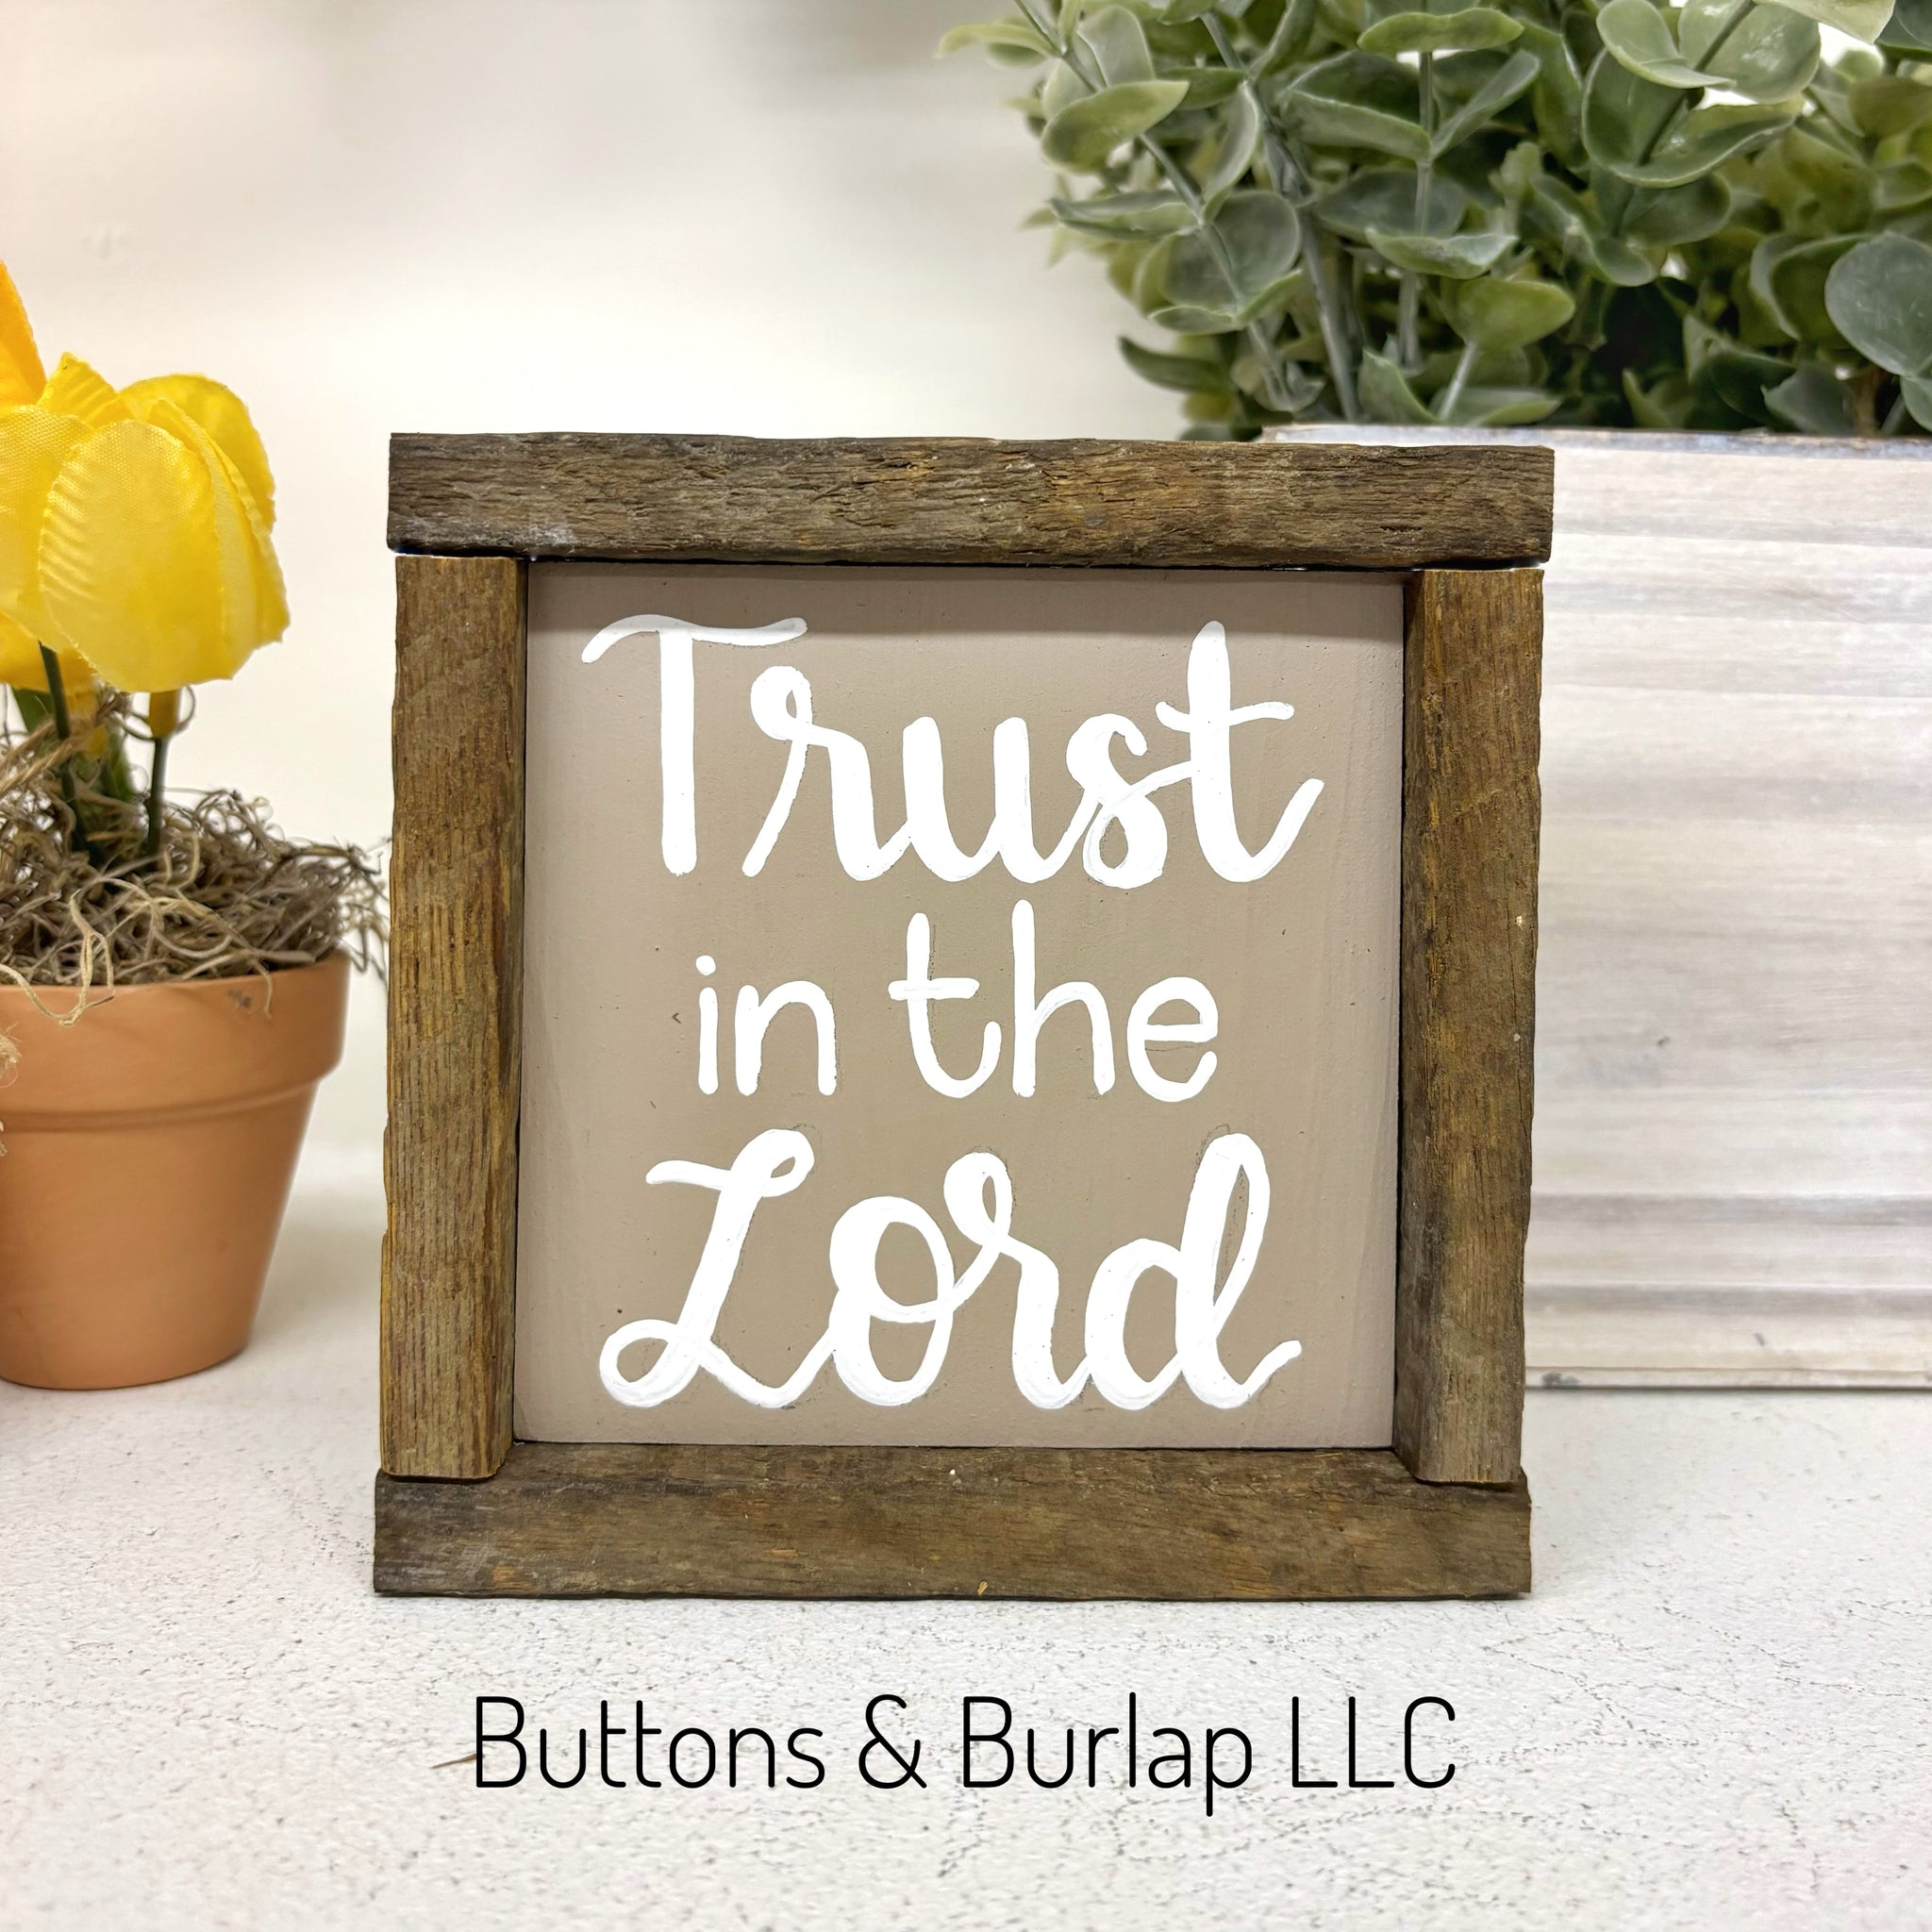 Trust in the Lord